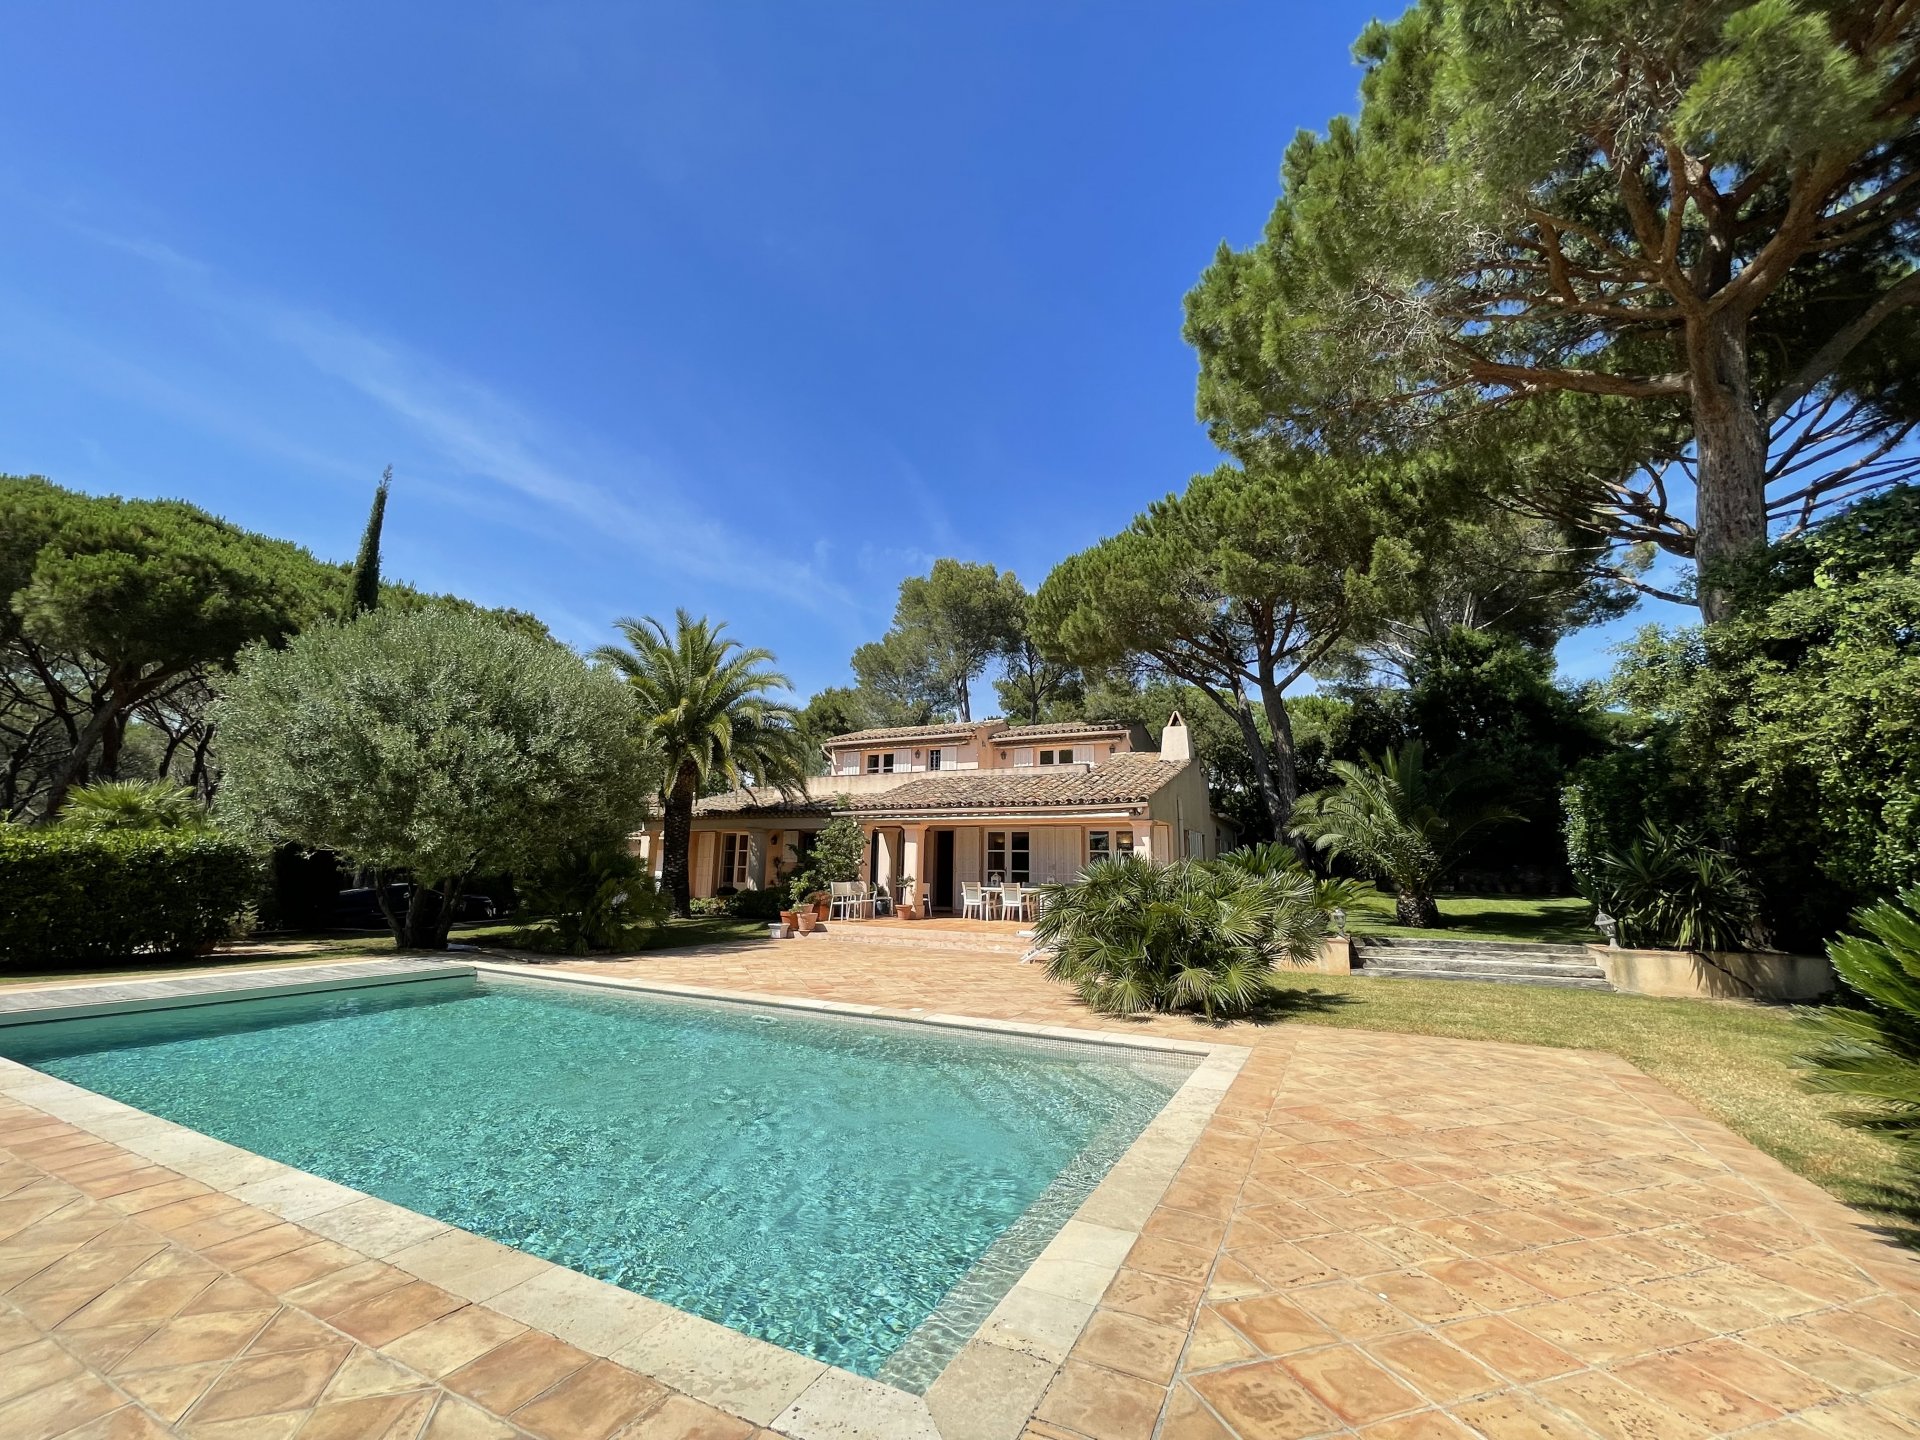 Lovely provencal villa for sale in Ramatuelle. Walking distance to Pampelonne beach. 5 bedrooms, pool & garage. Large potential